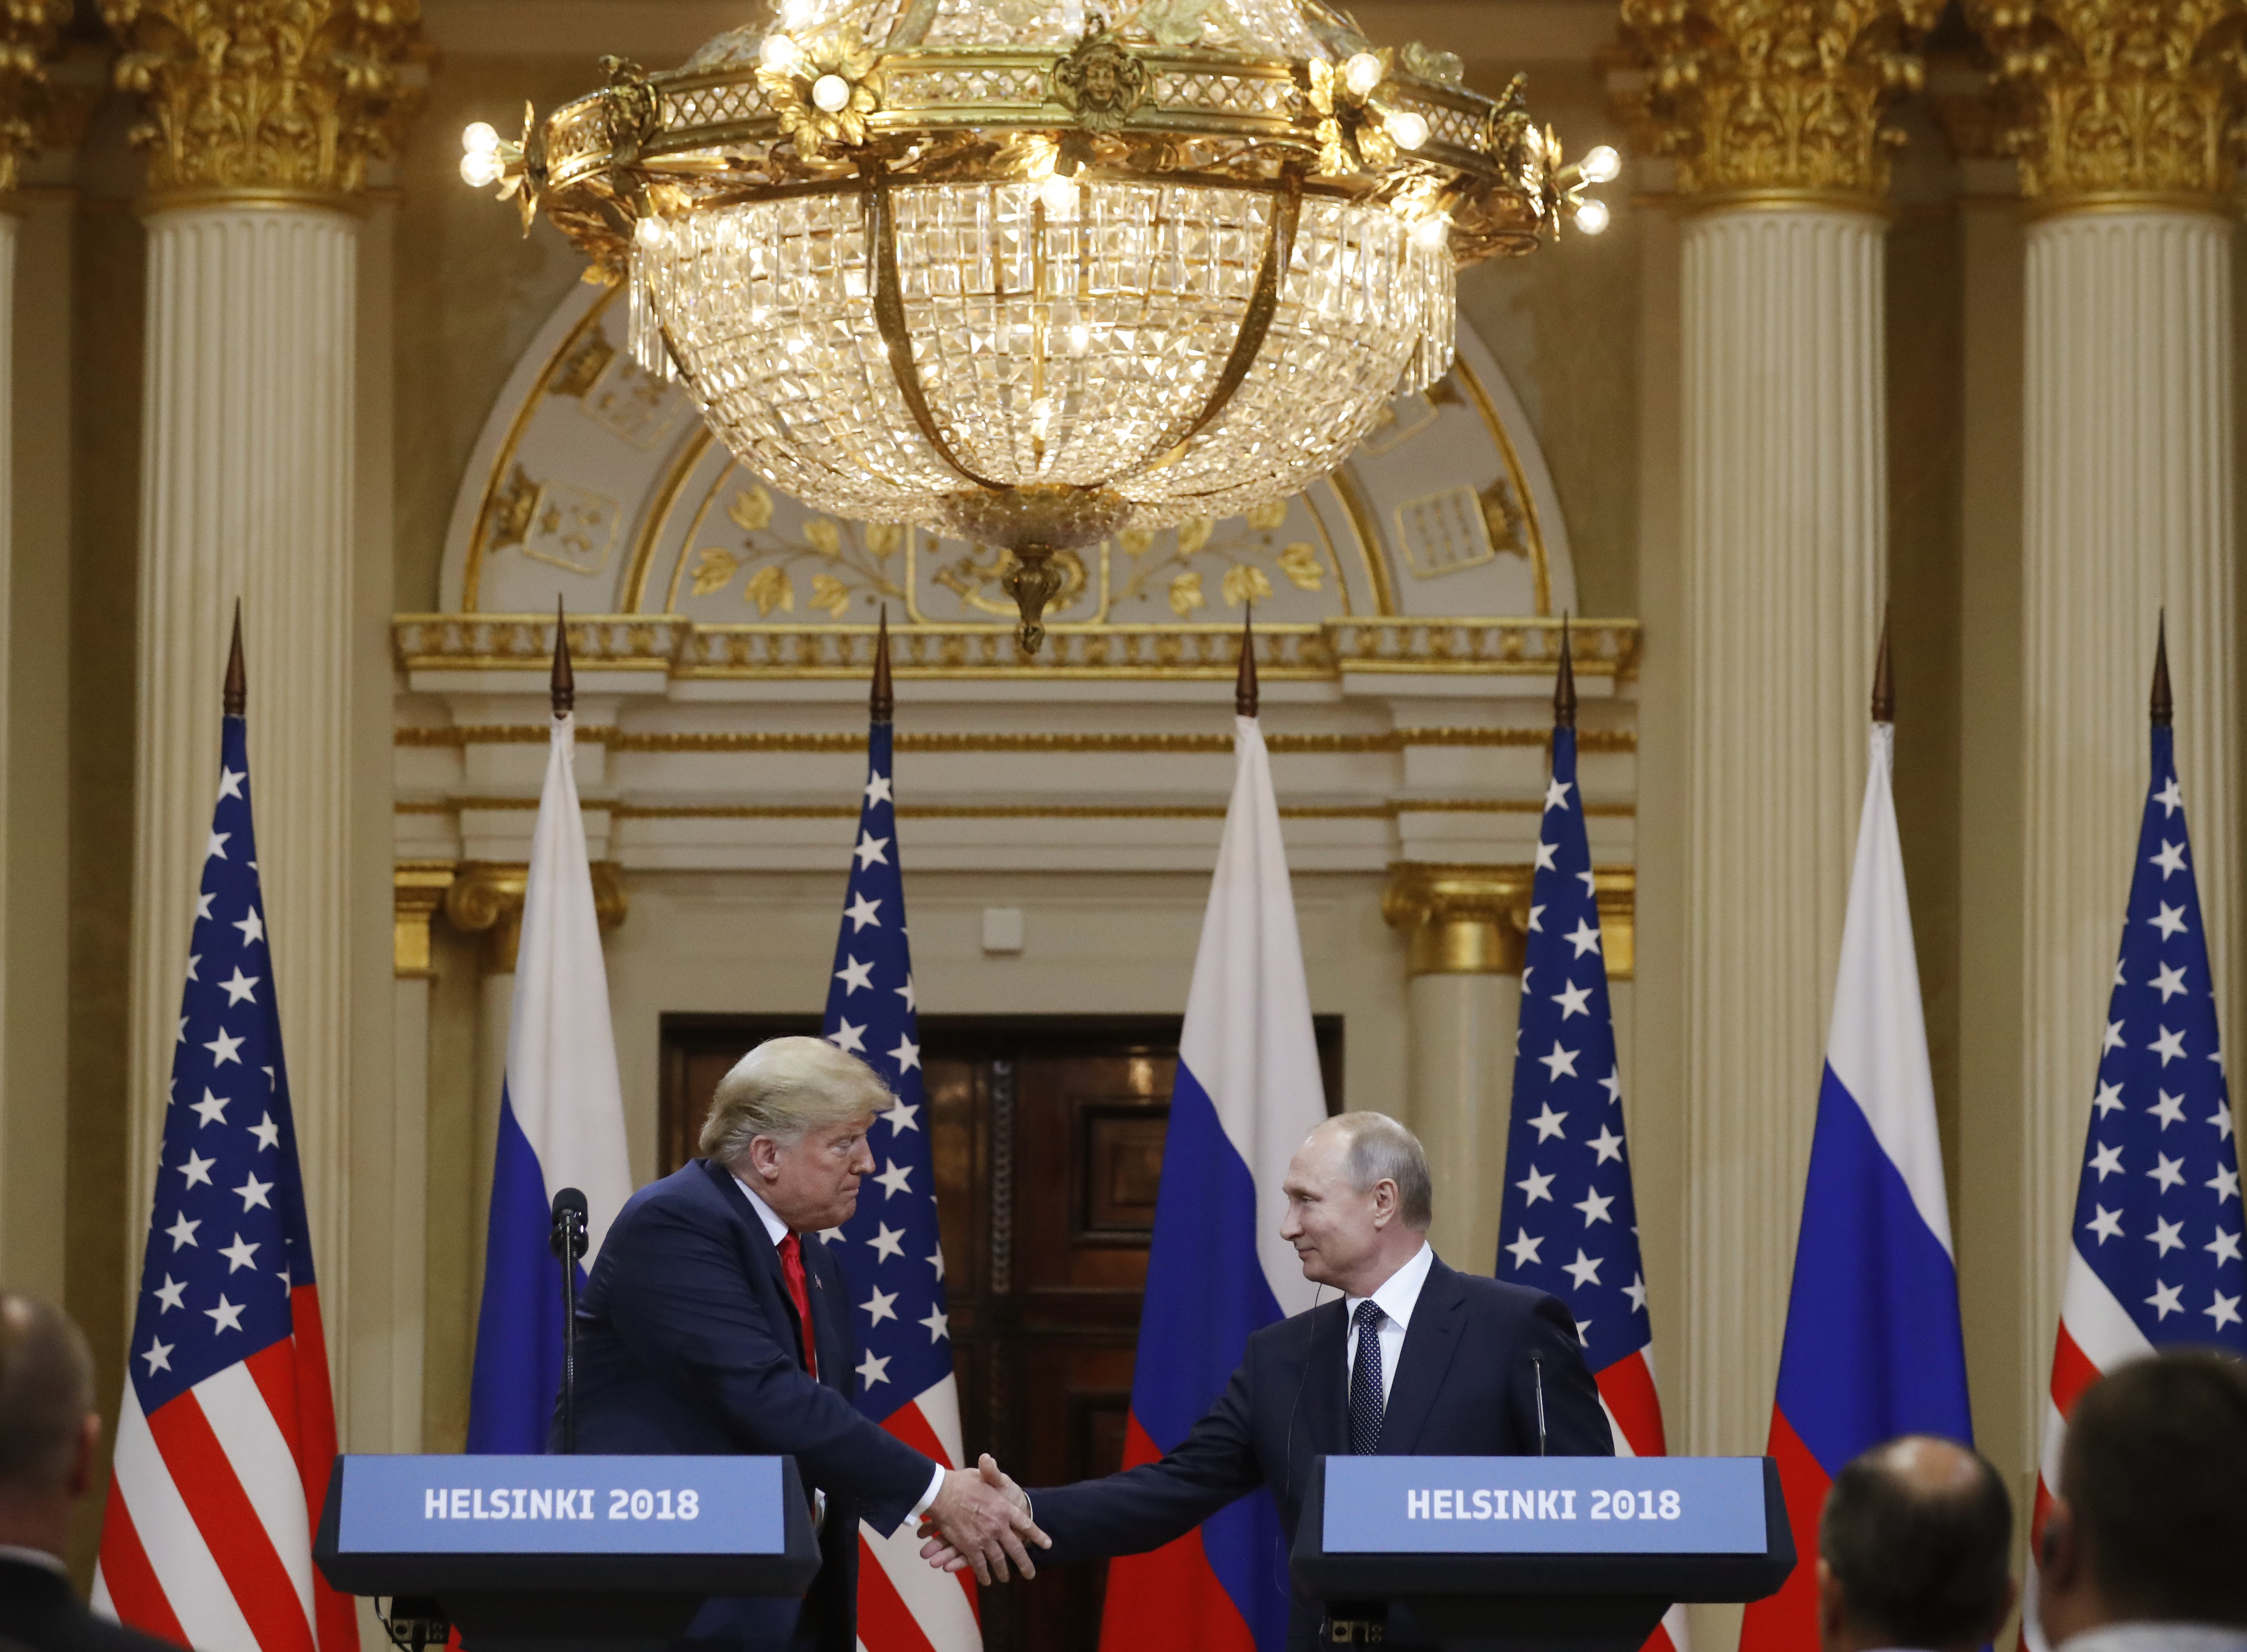 Donald Trump shakes hands with Vladimir Putin at the Presidential Palace in Helsinki